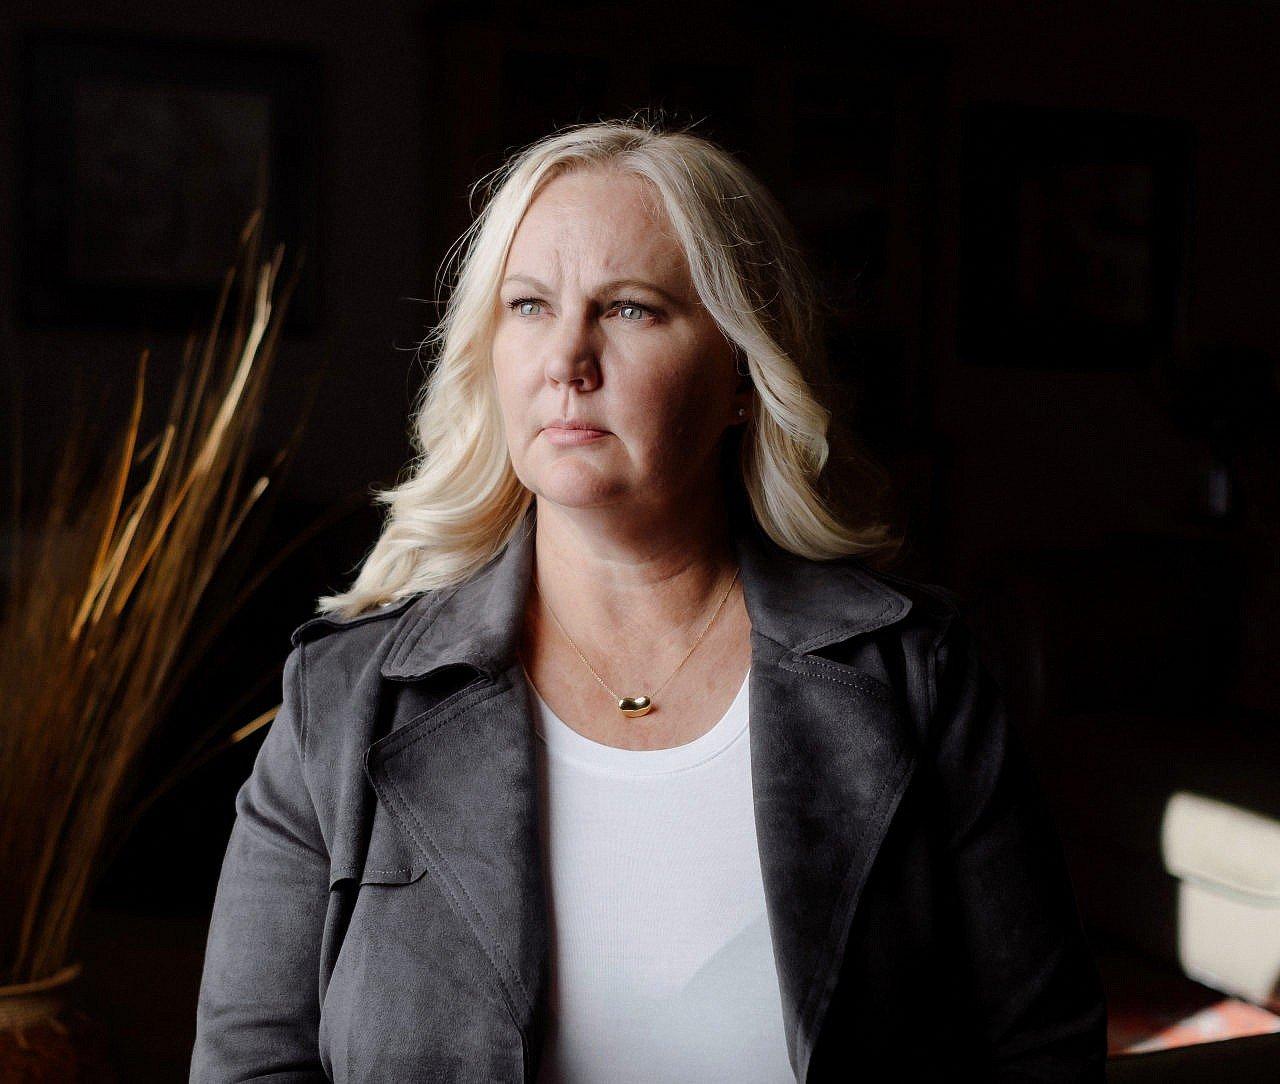 Kelly Schneider was only 14 when Gregory began grooming her for abuse. She says that when she and her parents complained to school administrators, no action was taken. For years she believed she was Gregoryâs only victim; now she suspects that she was only the first. 